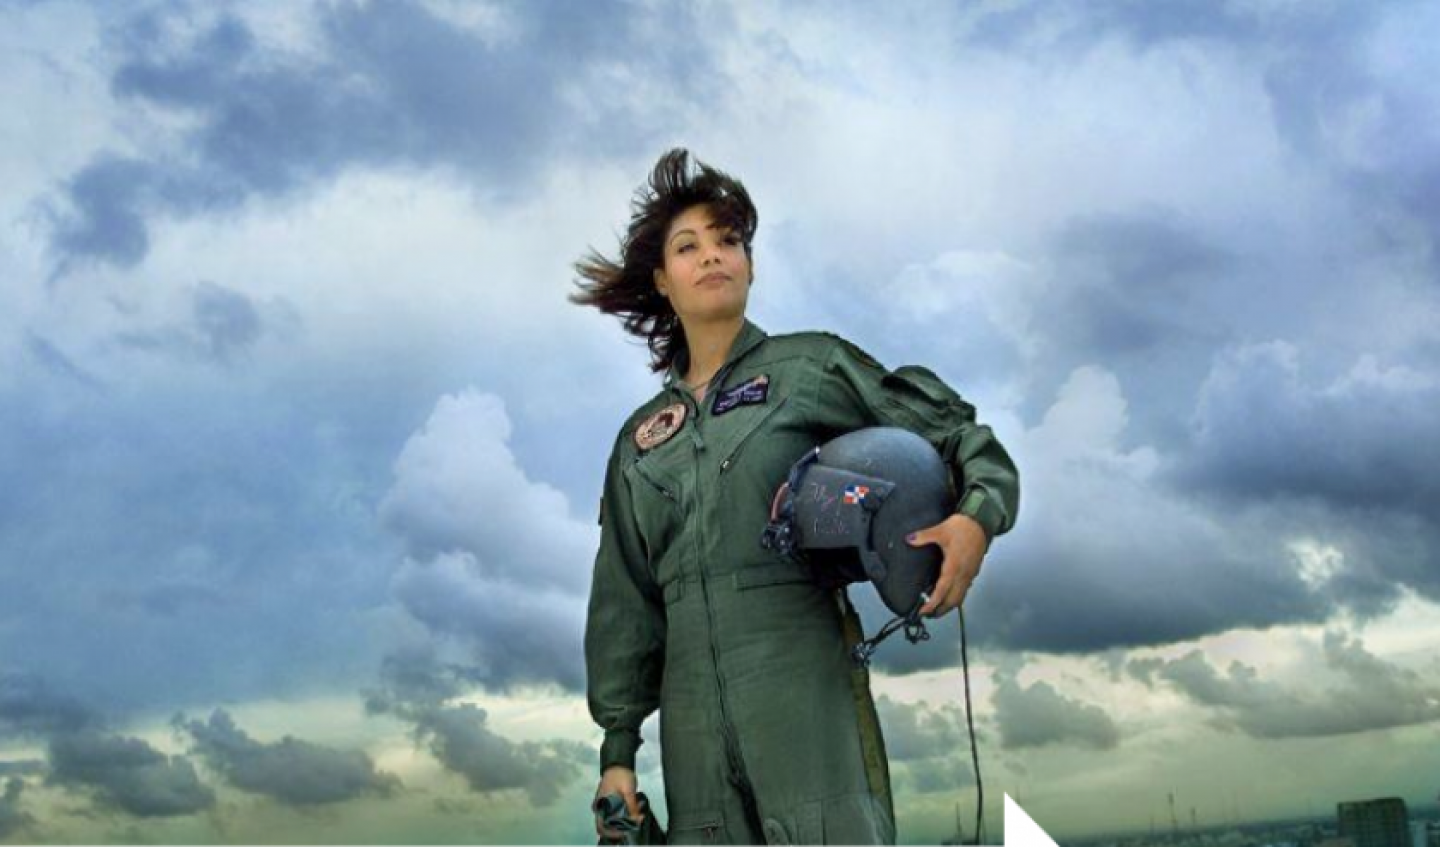 Marisol Chalas wearing her flight uniform and holding a helmet standing against a cloud-filled sky.